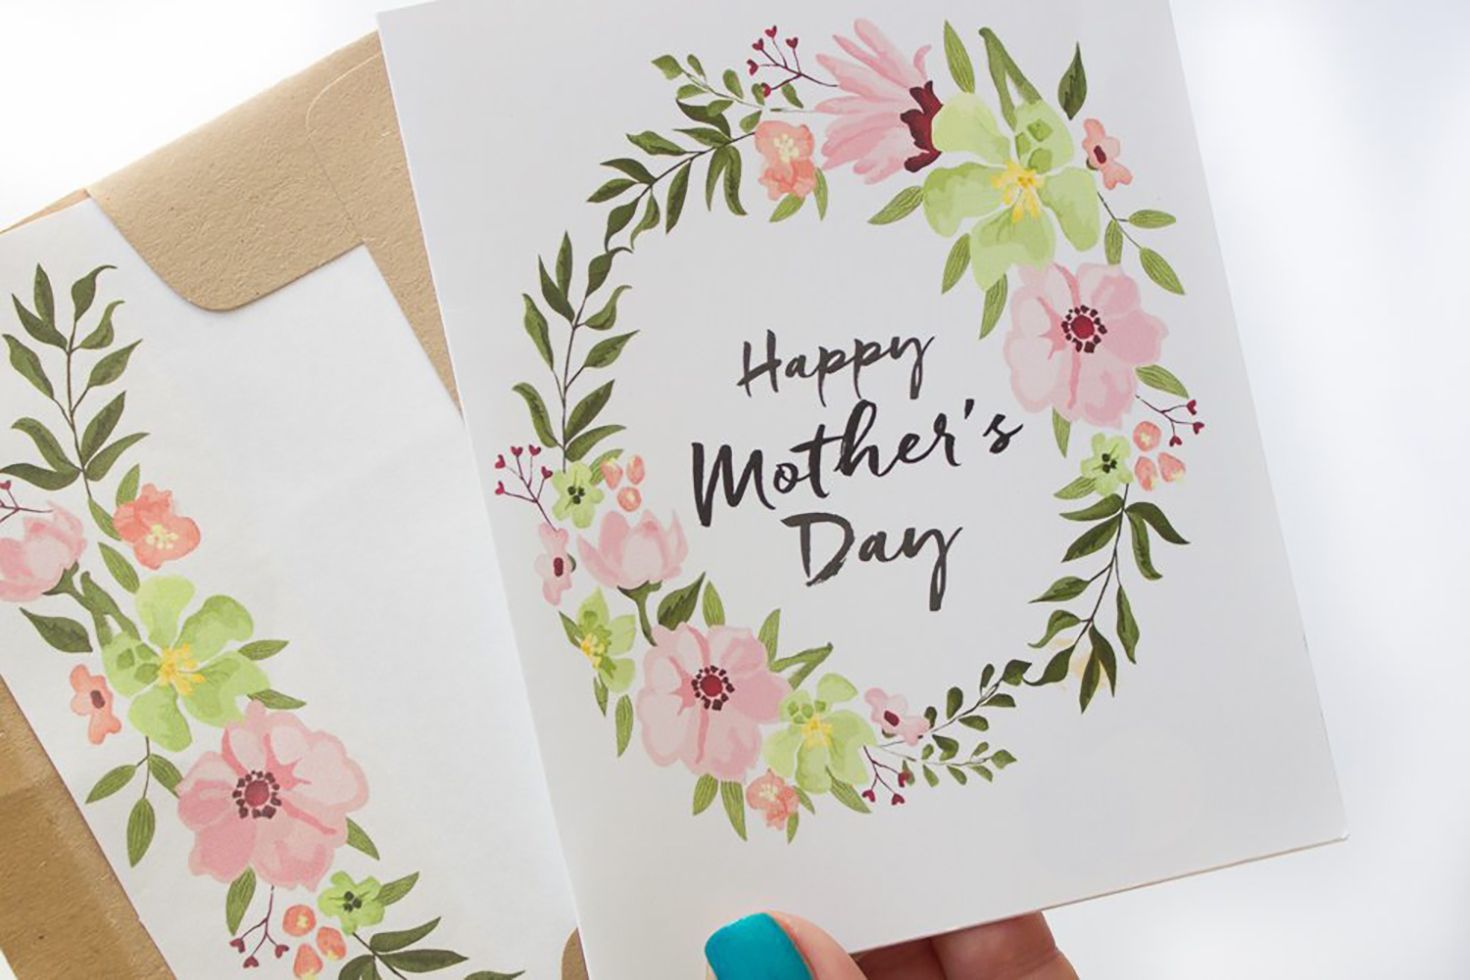 Mothers Day themed card Happy Mothers Day Rose Card Happy Mothers Day Rose Card Mothers Day Theme Card